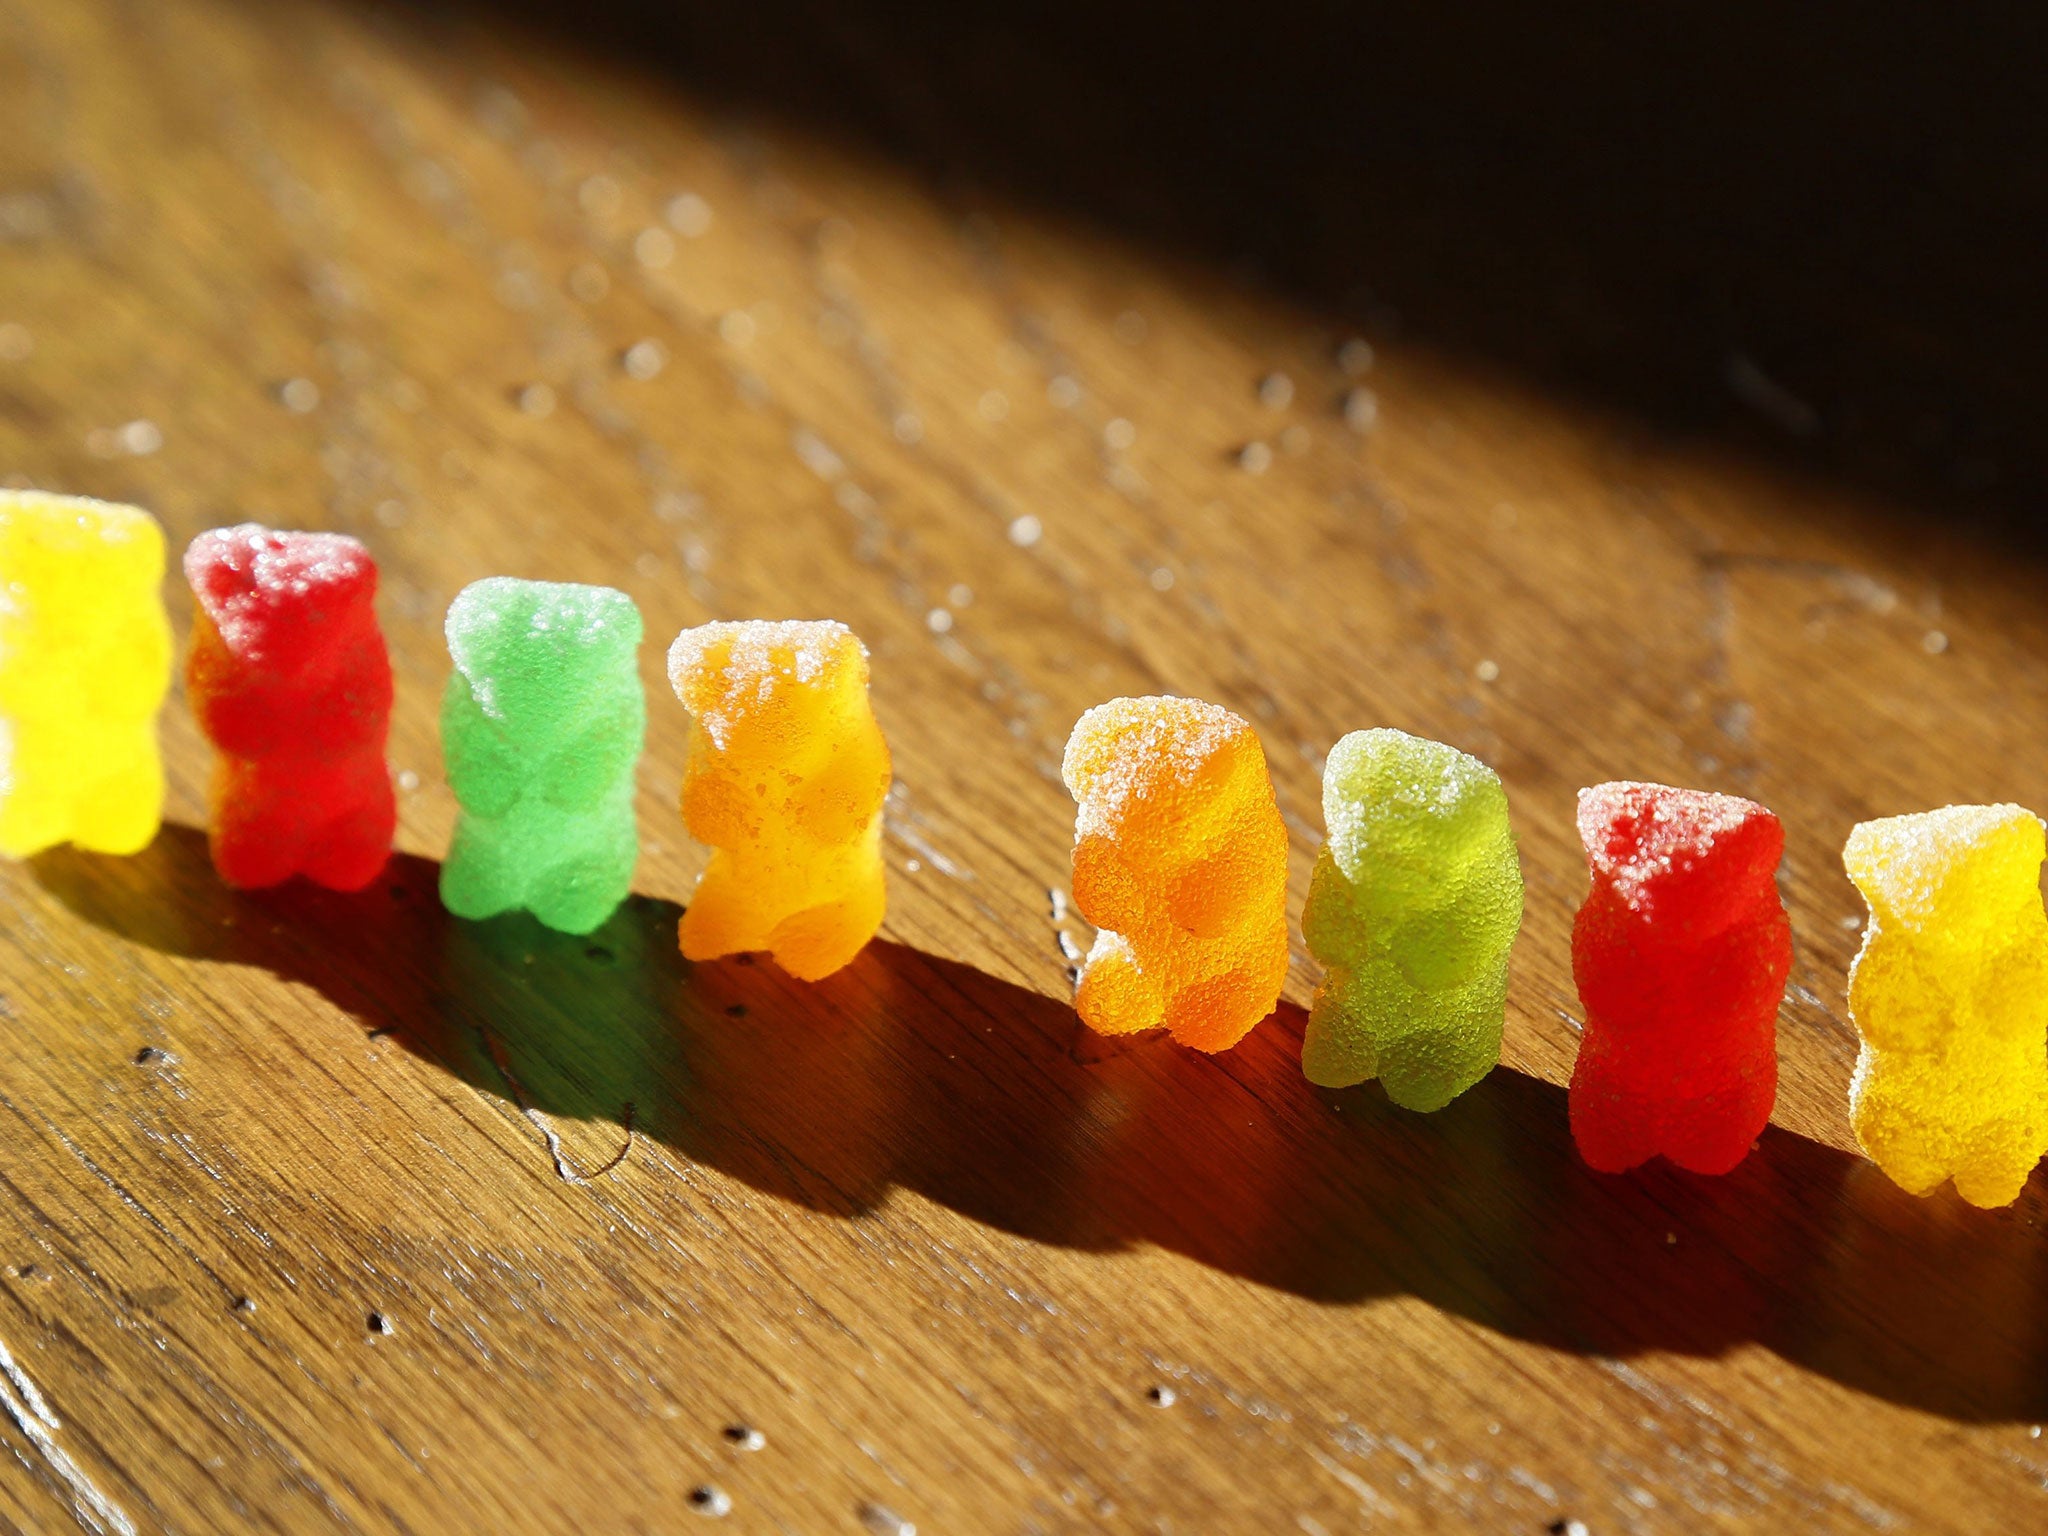 Marijuana-infused sour gummy bear candies (R) are shown next to regular ones (L)